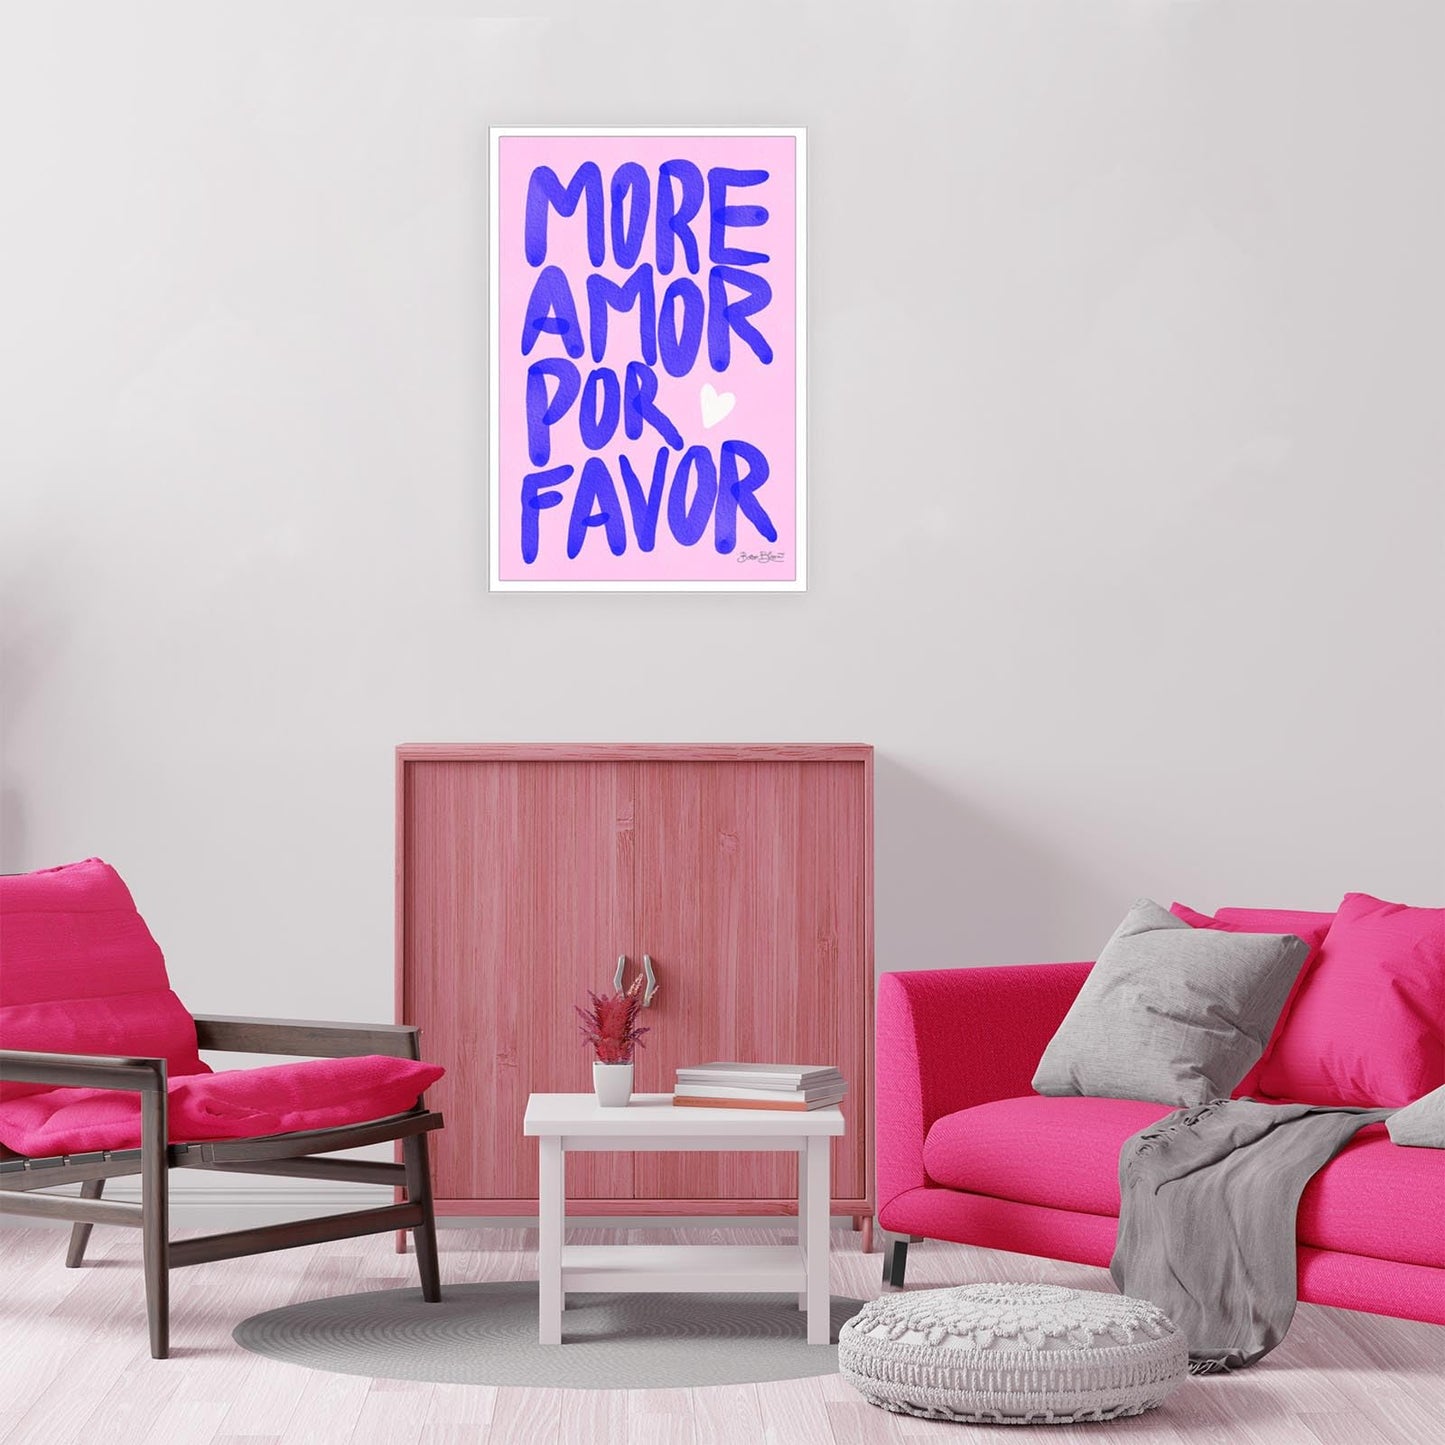 NAVIWEEK Retro Trendy More Amor Por Favor Aesthetic Canvas Wall Art Purple Maximalist Inspirational Poster Modern Colorful Eclectic Prints Painting For Home Bedroom Dorm Wall Decor 12x16in Unframed